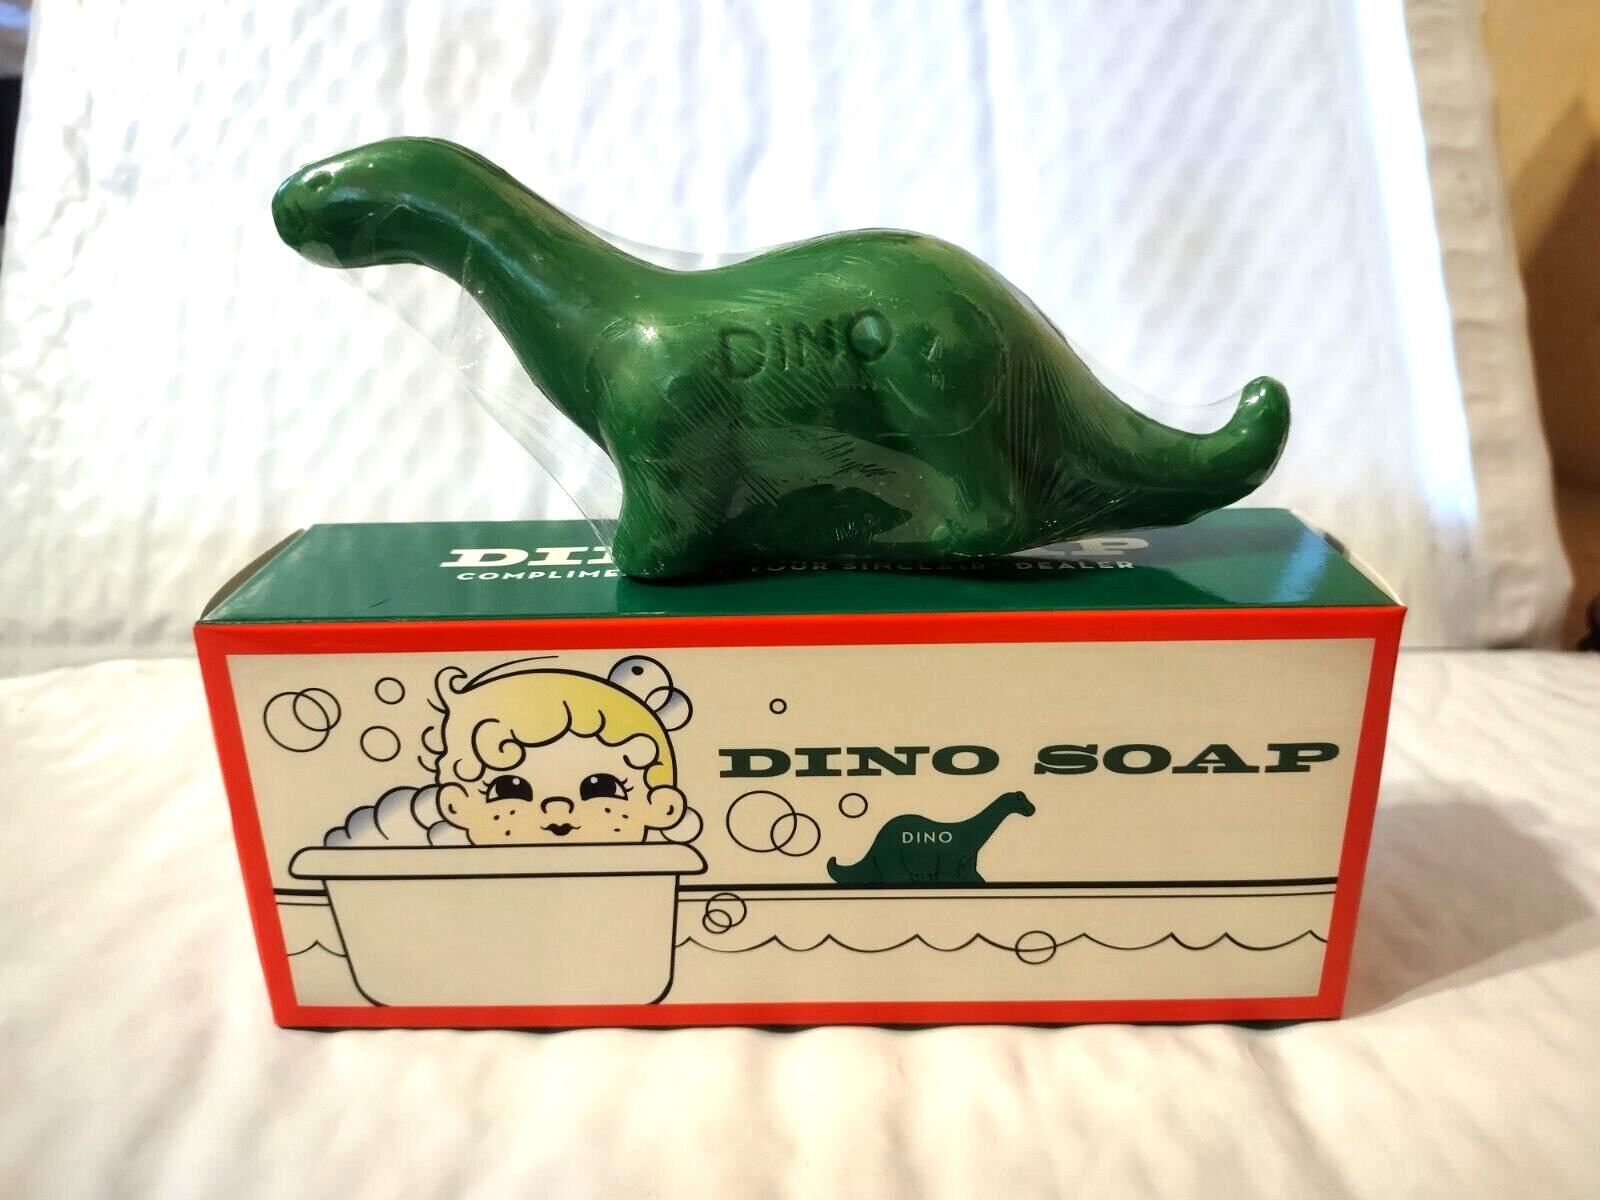 Sinclair Dino Soap Promotional Items Green New